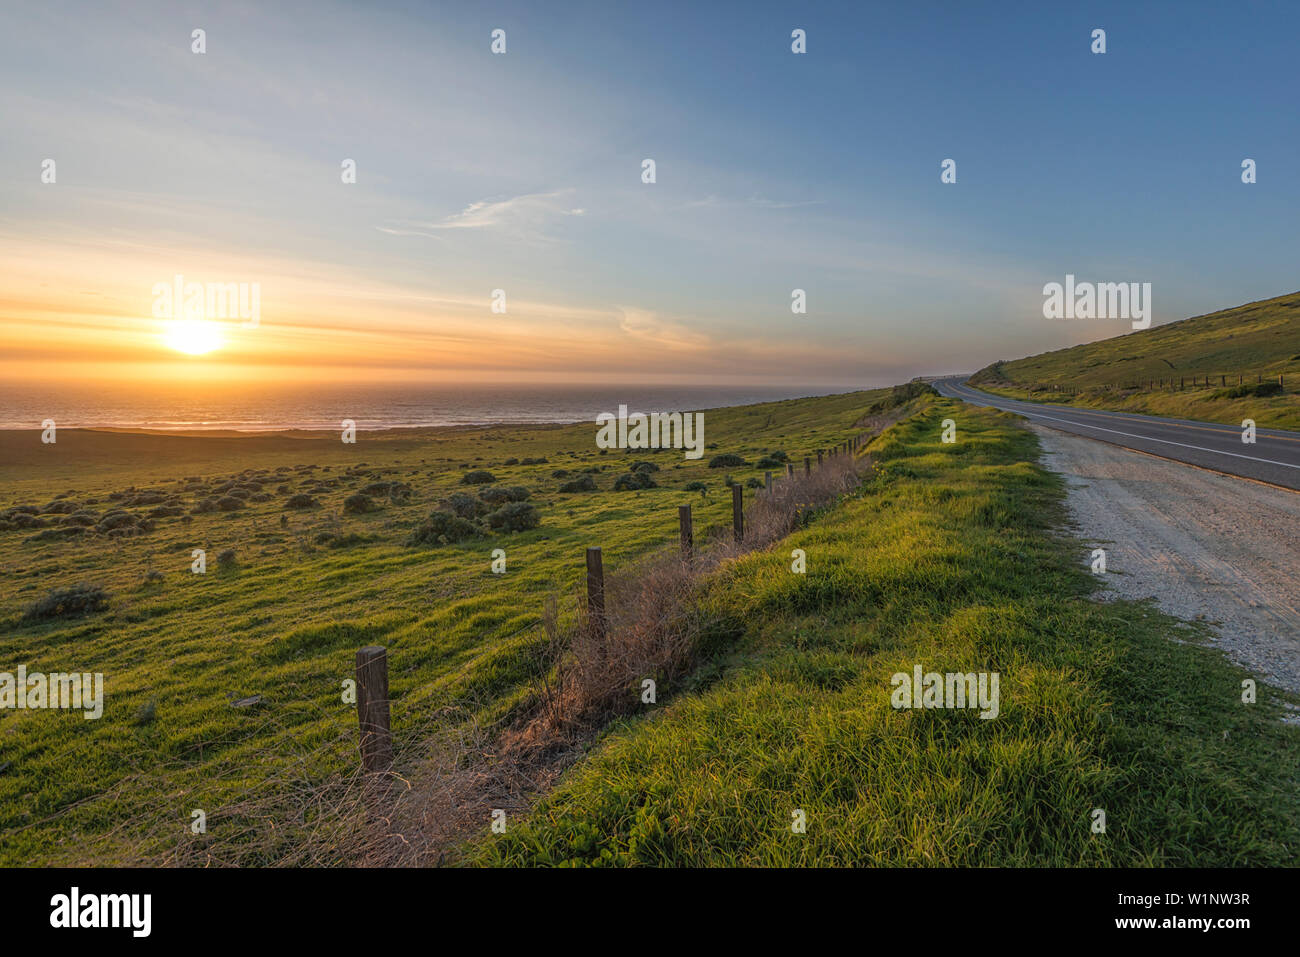 The Sun setting over the ocean with a meadow in the foreground. Big Sur, California, United States. Stock Photo